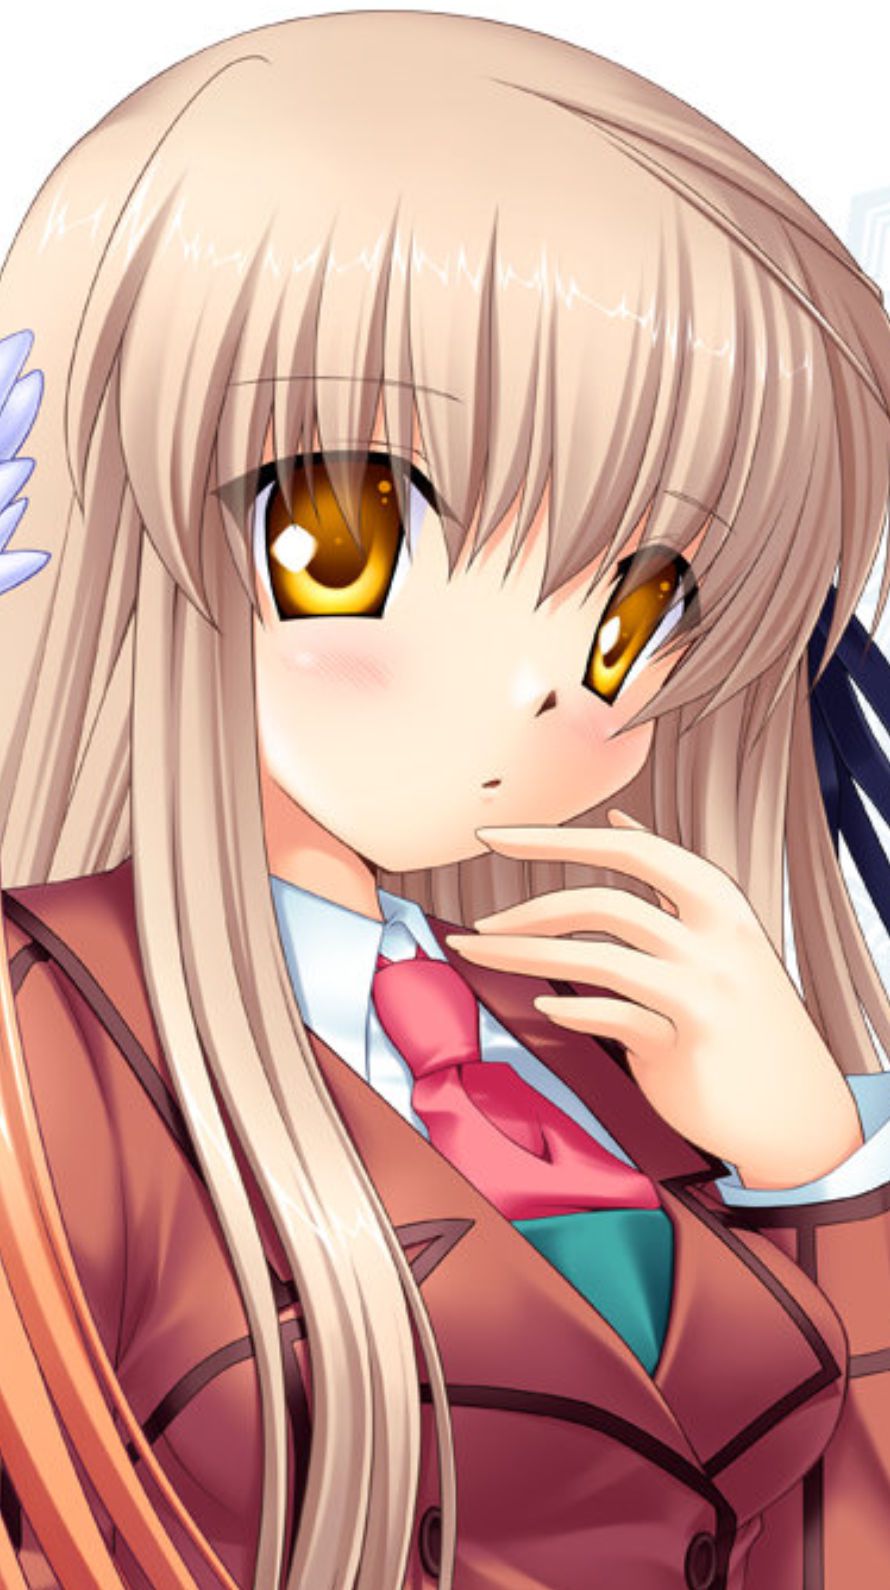 Rewrite リライト Iphone壁紙画像 Androidスマホ壁紙 12 千里朱音 Iphone6 Iphone5s アニメ壁紙ネット Pc Android Iphone壁紙 画像